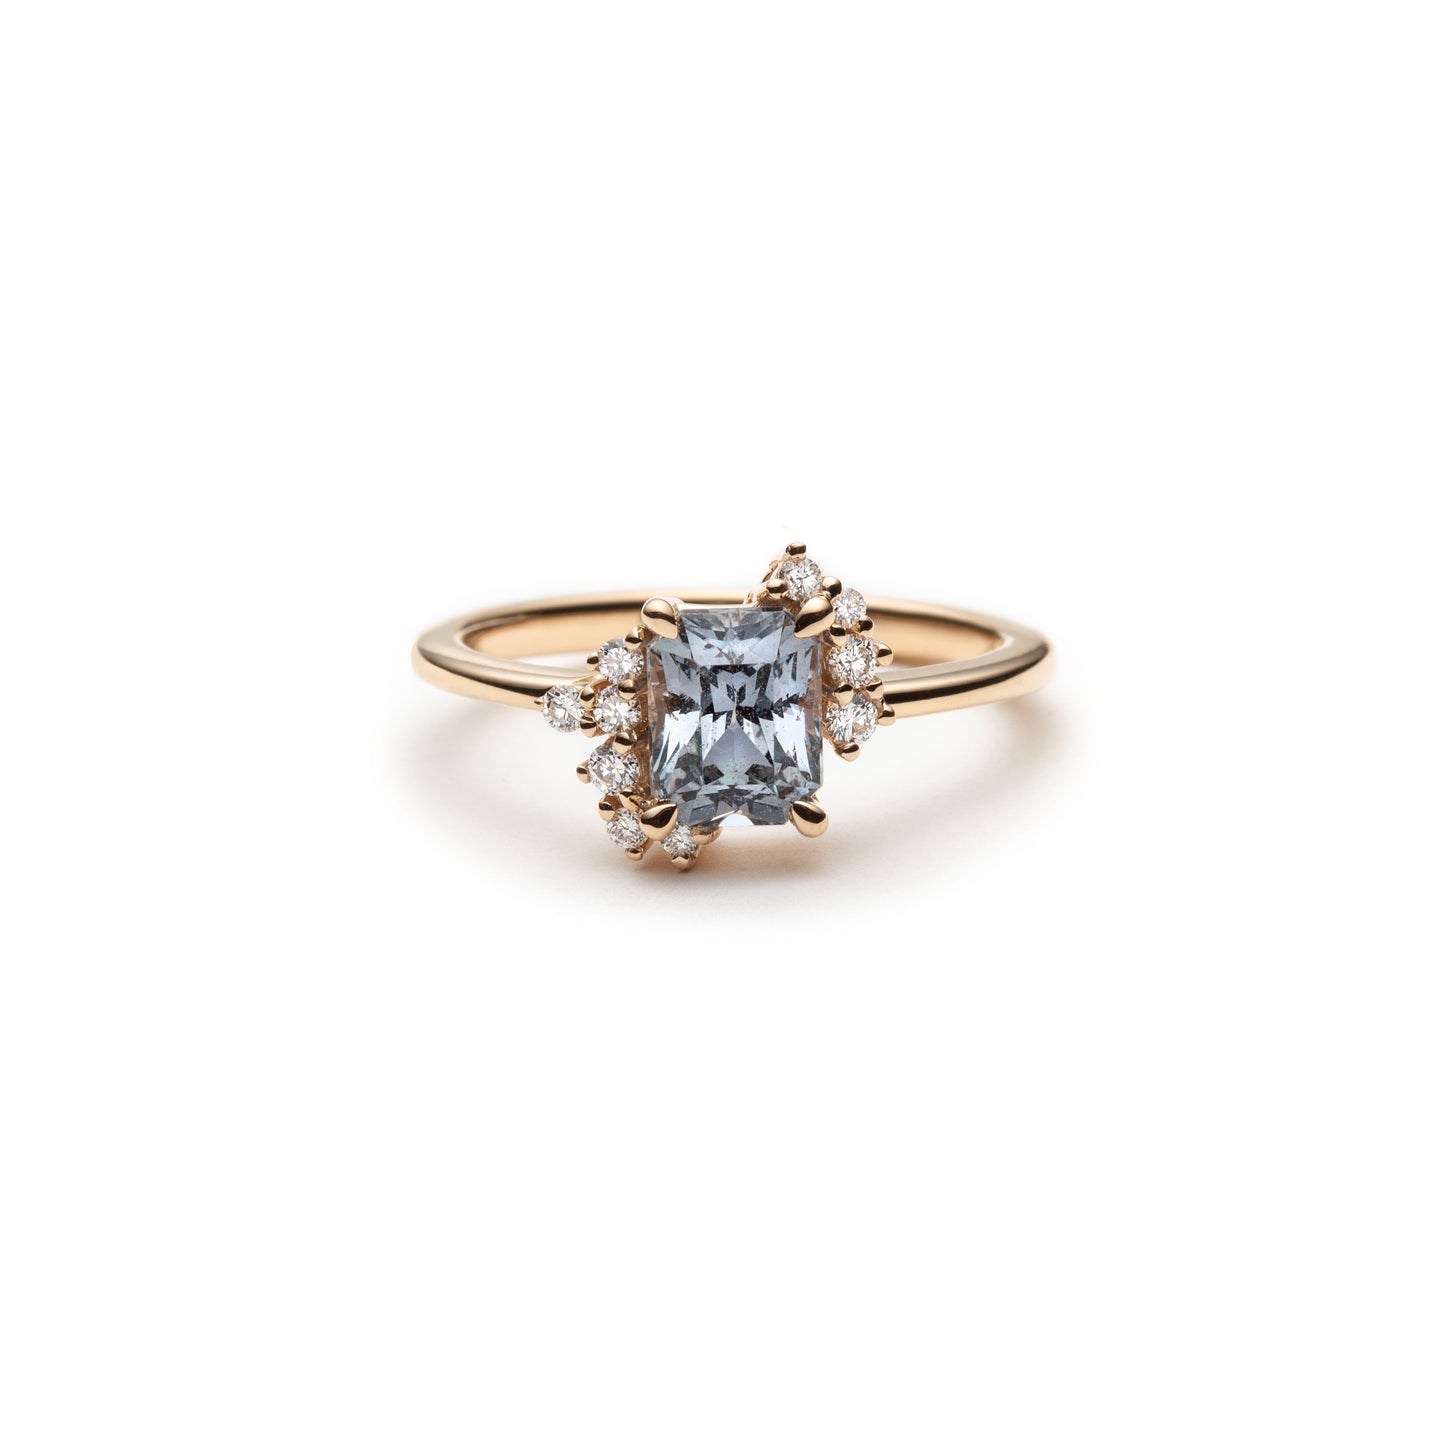 One of a Kind Gray Sapphire and Diamond Asymmetric Ring